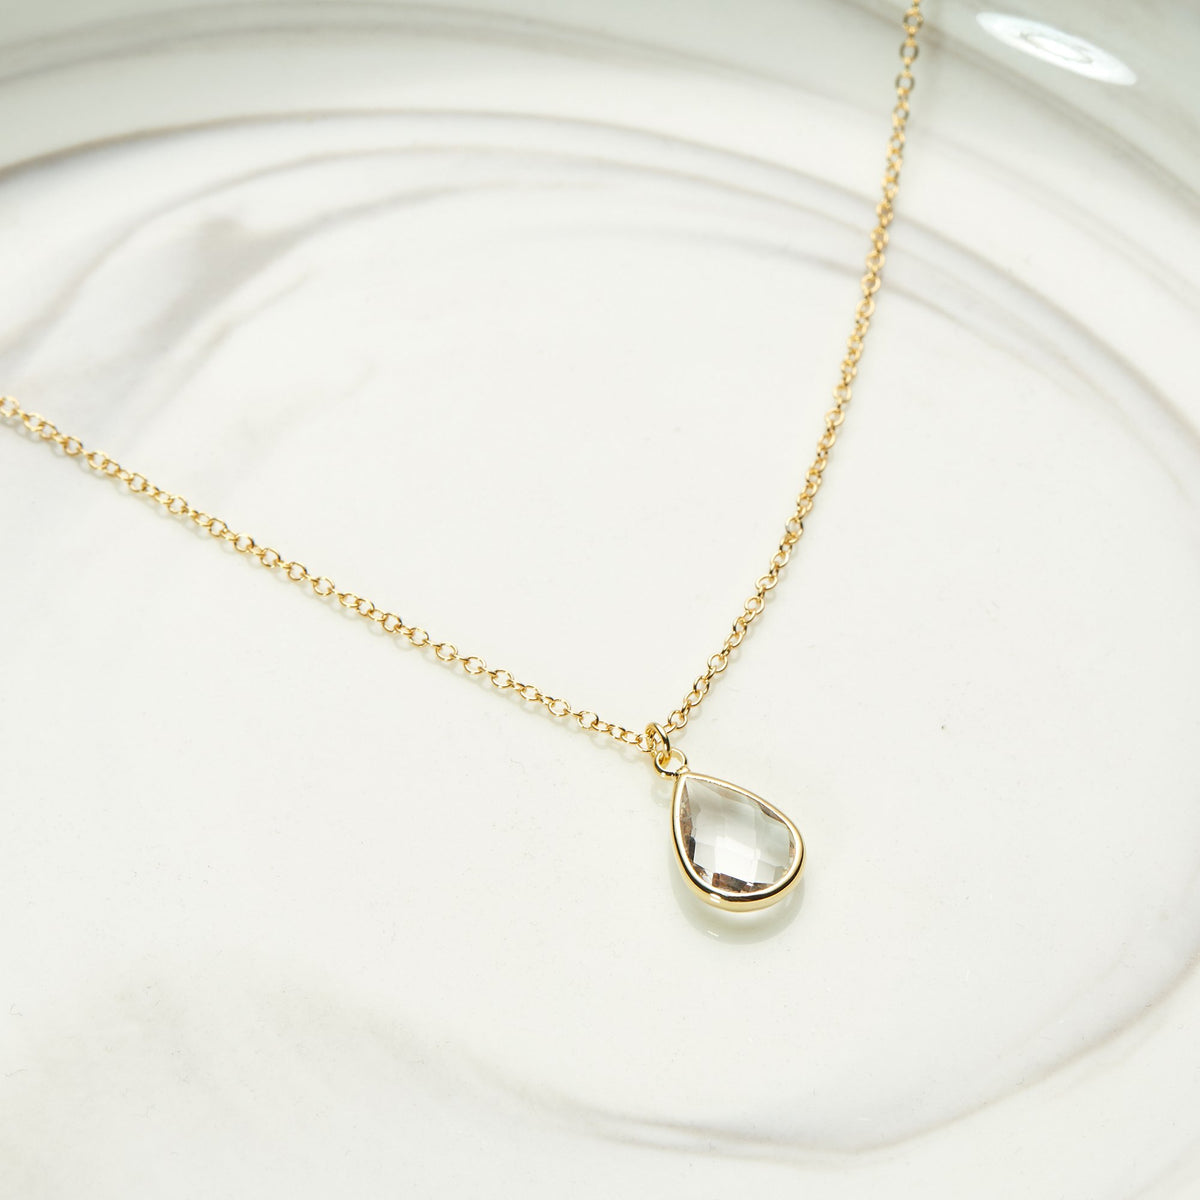 Gift for Girlfriend Necklace - Dear Ava, Jewelry / Necklaces / Pendants